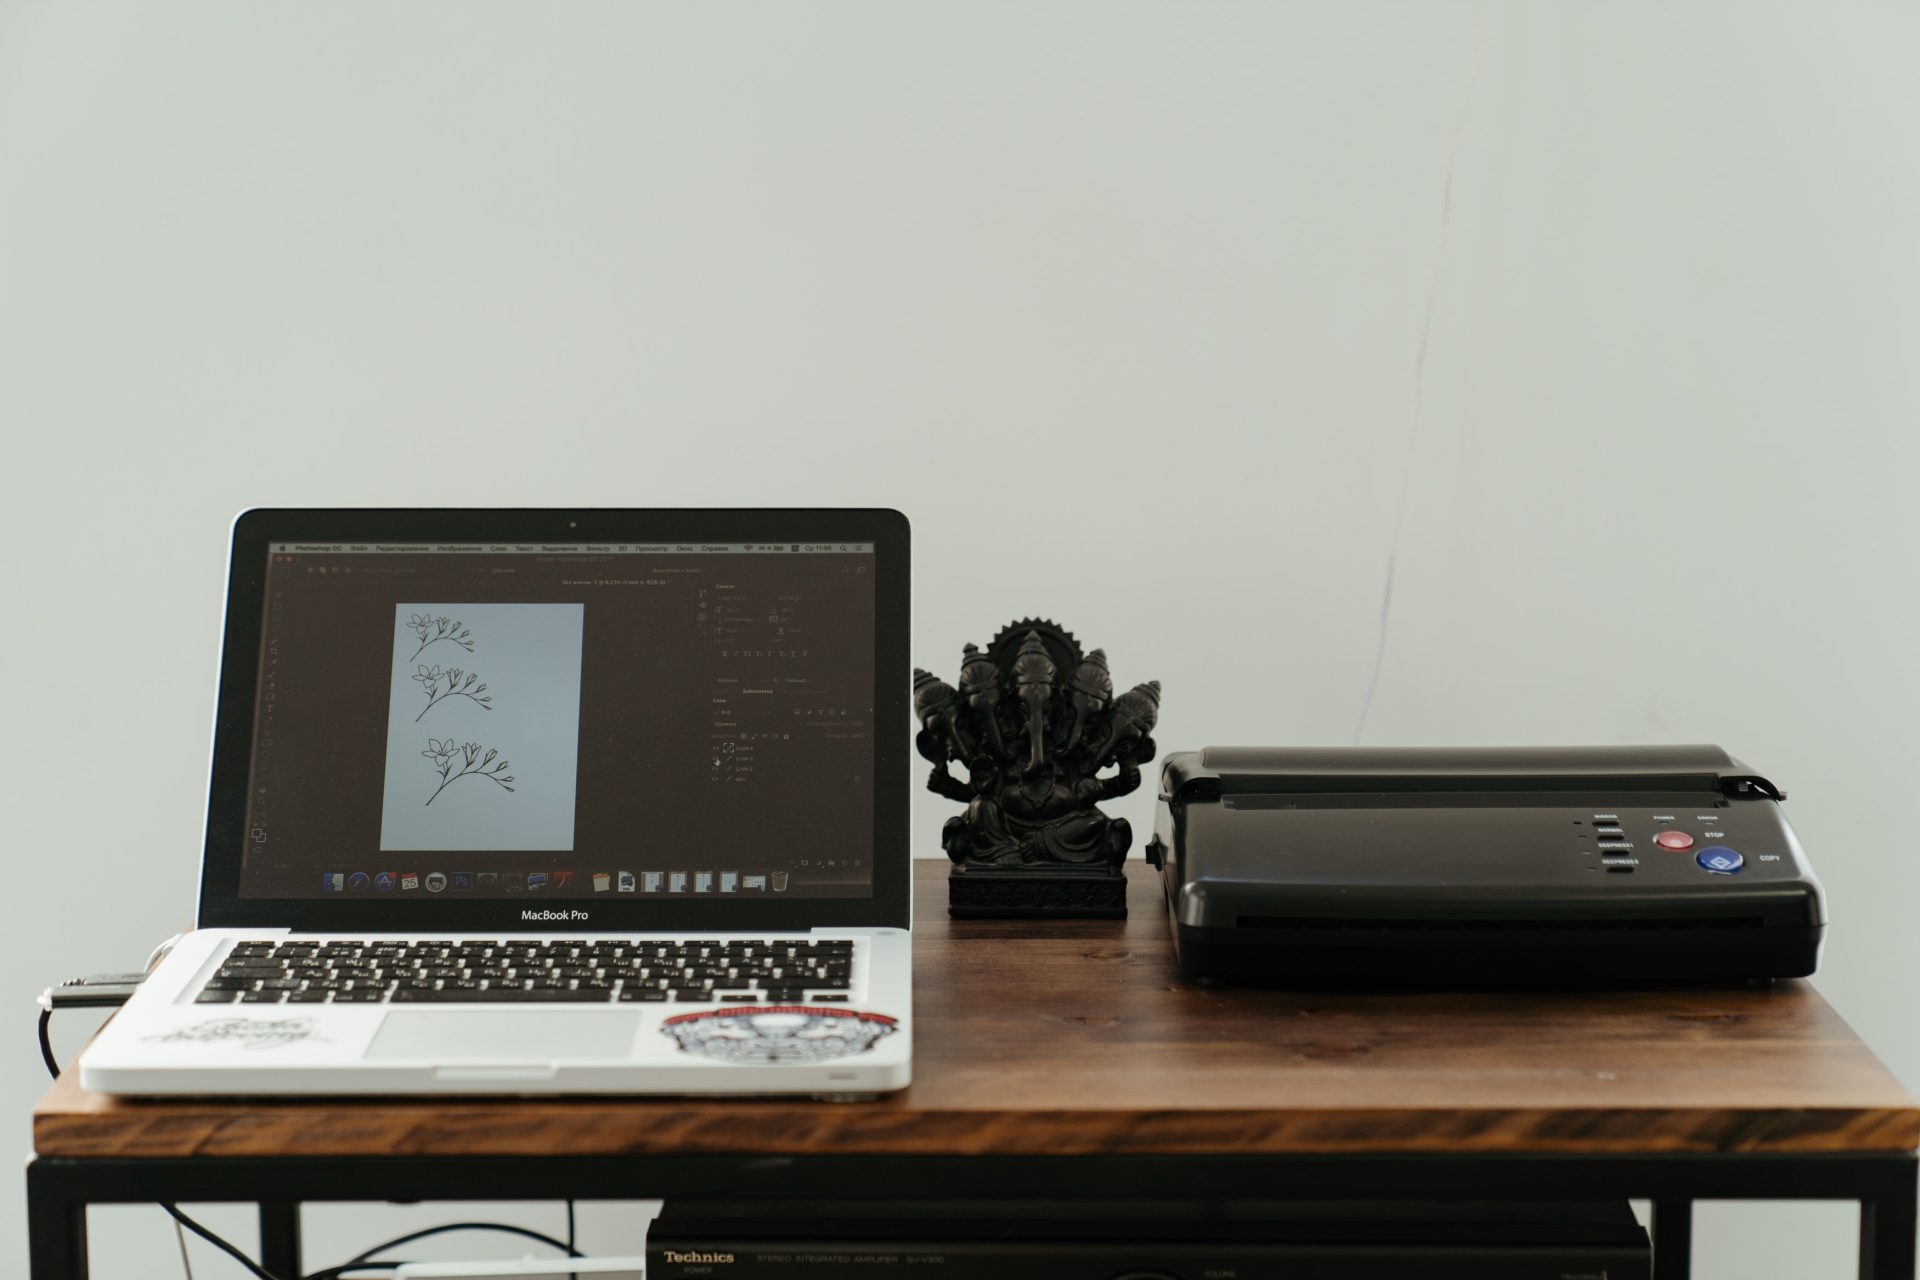 macbook pro and printer on the table